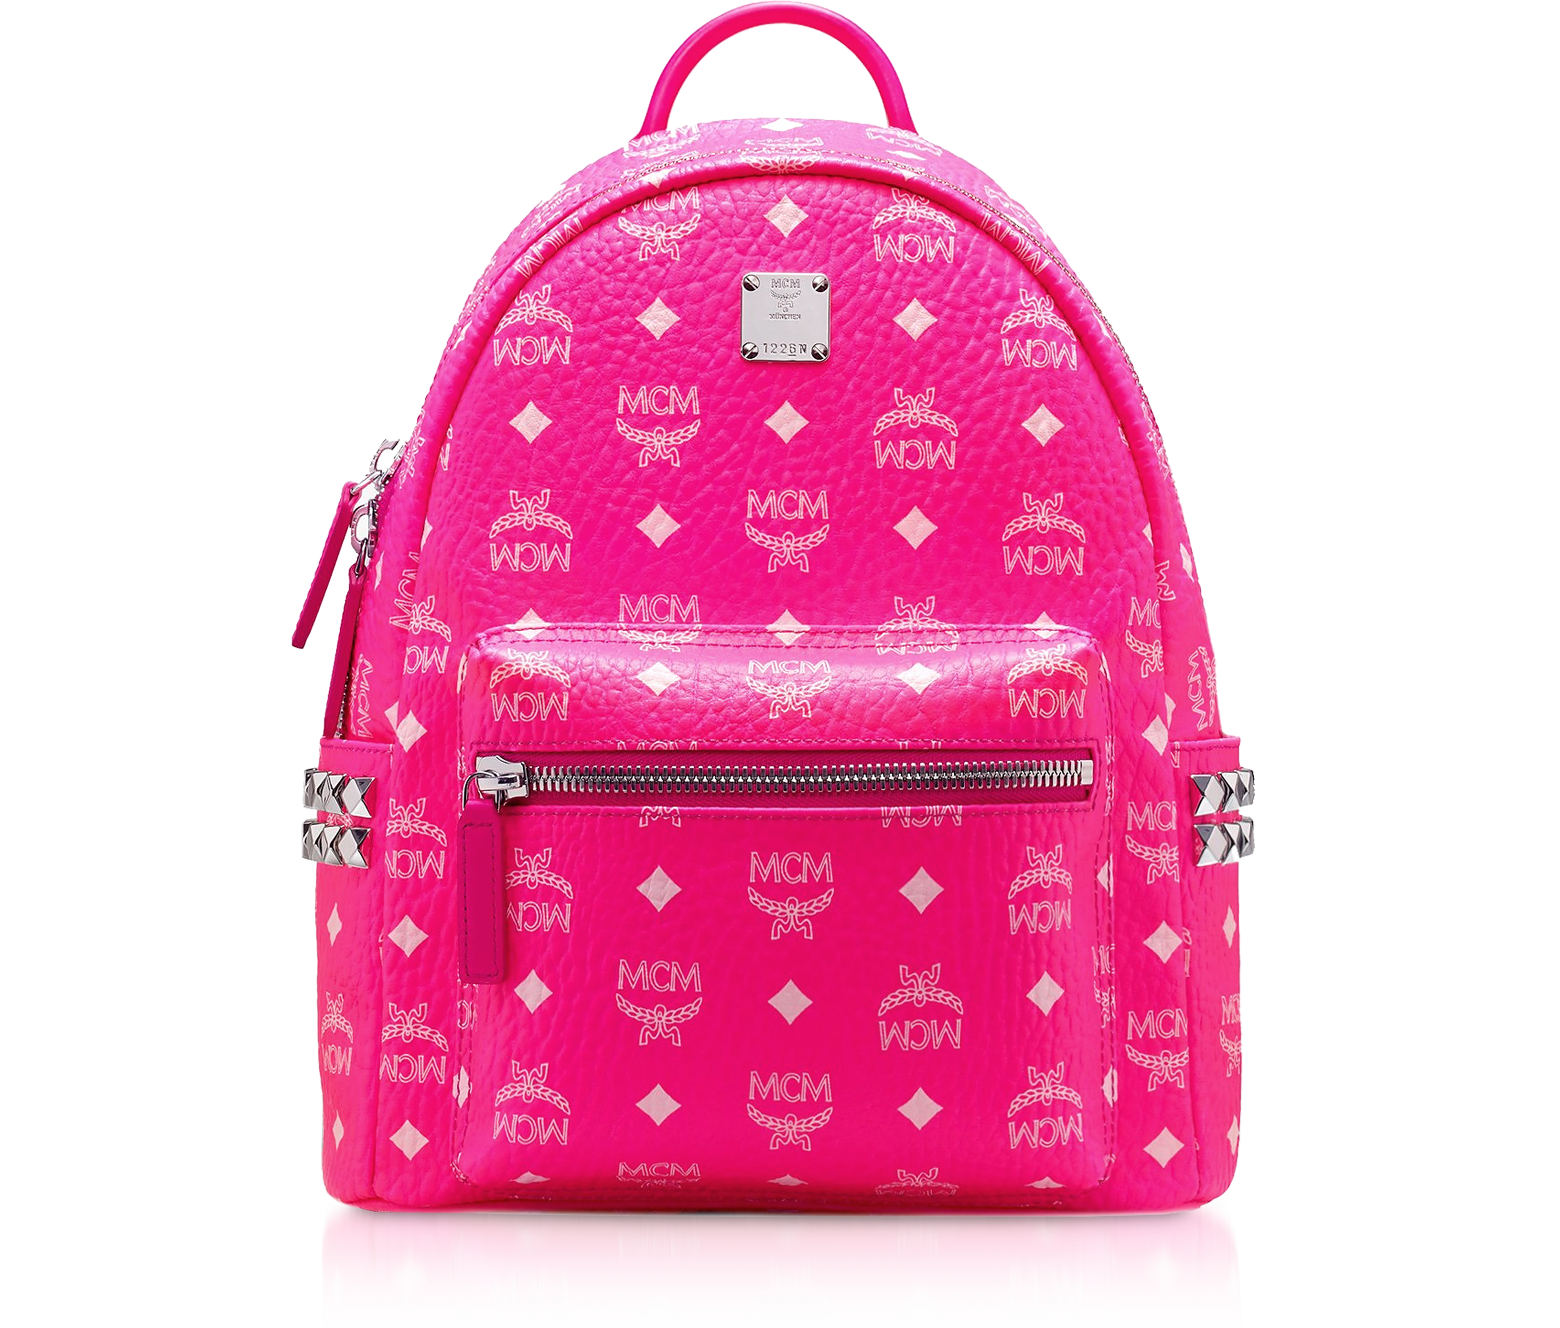 MCM Backpack Pink Small New